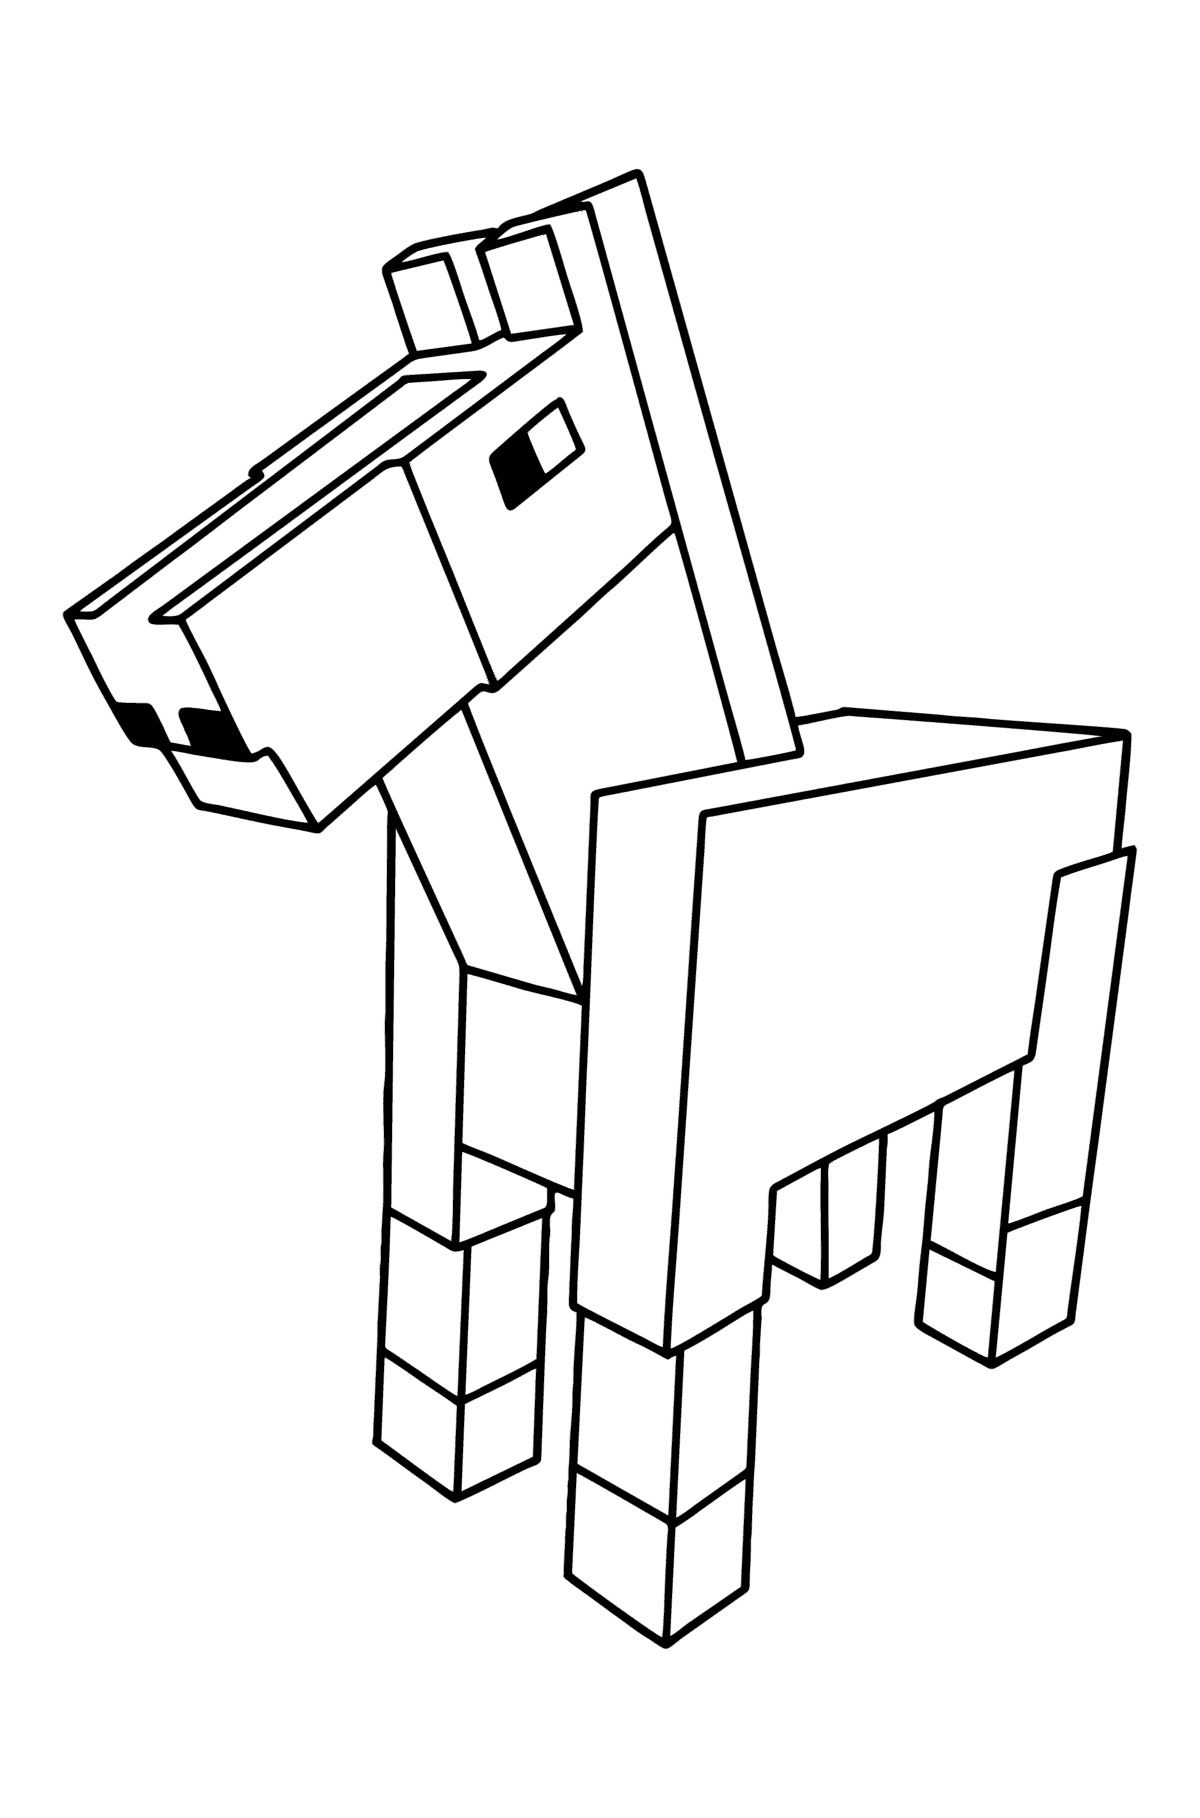 Minecraft Horse coloring page ♥ Online and Print for Free